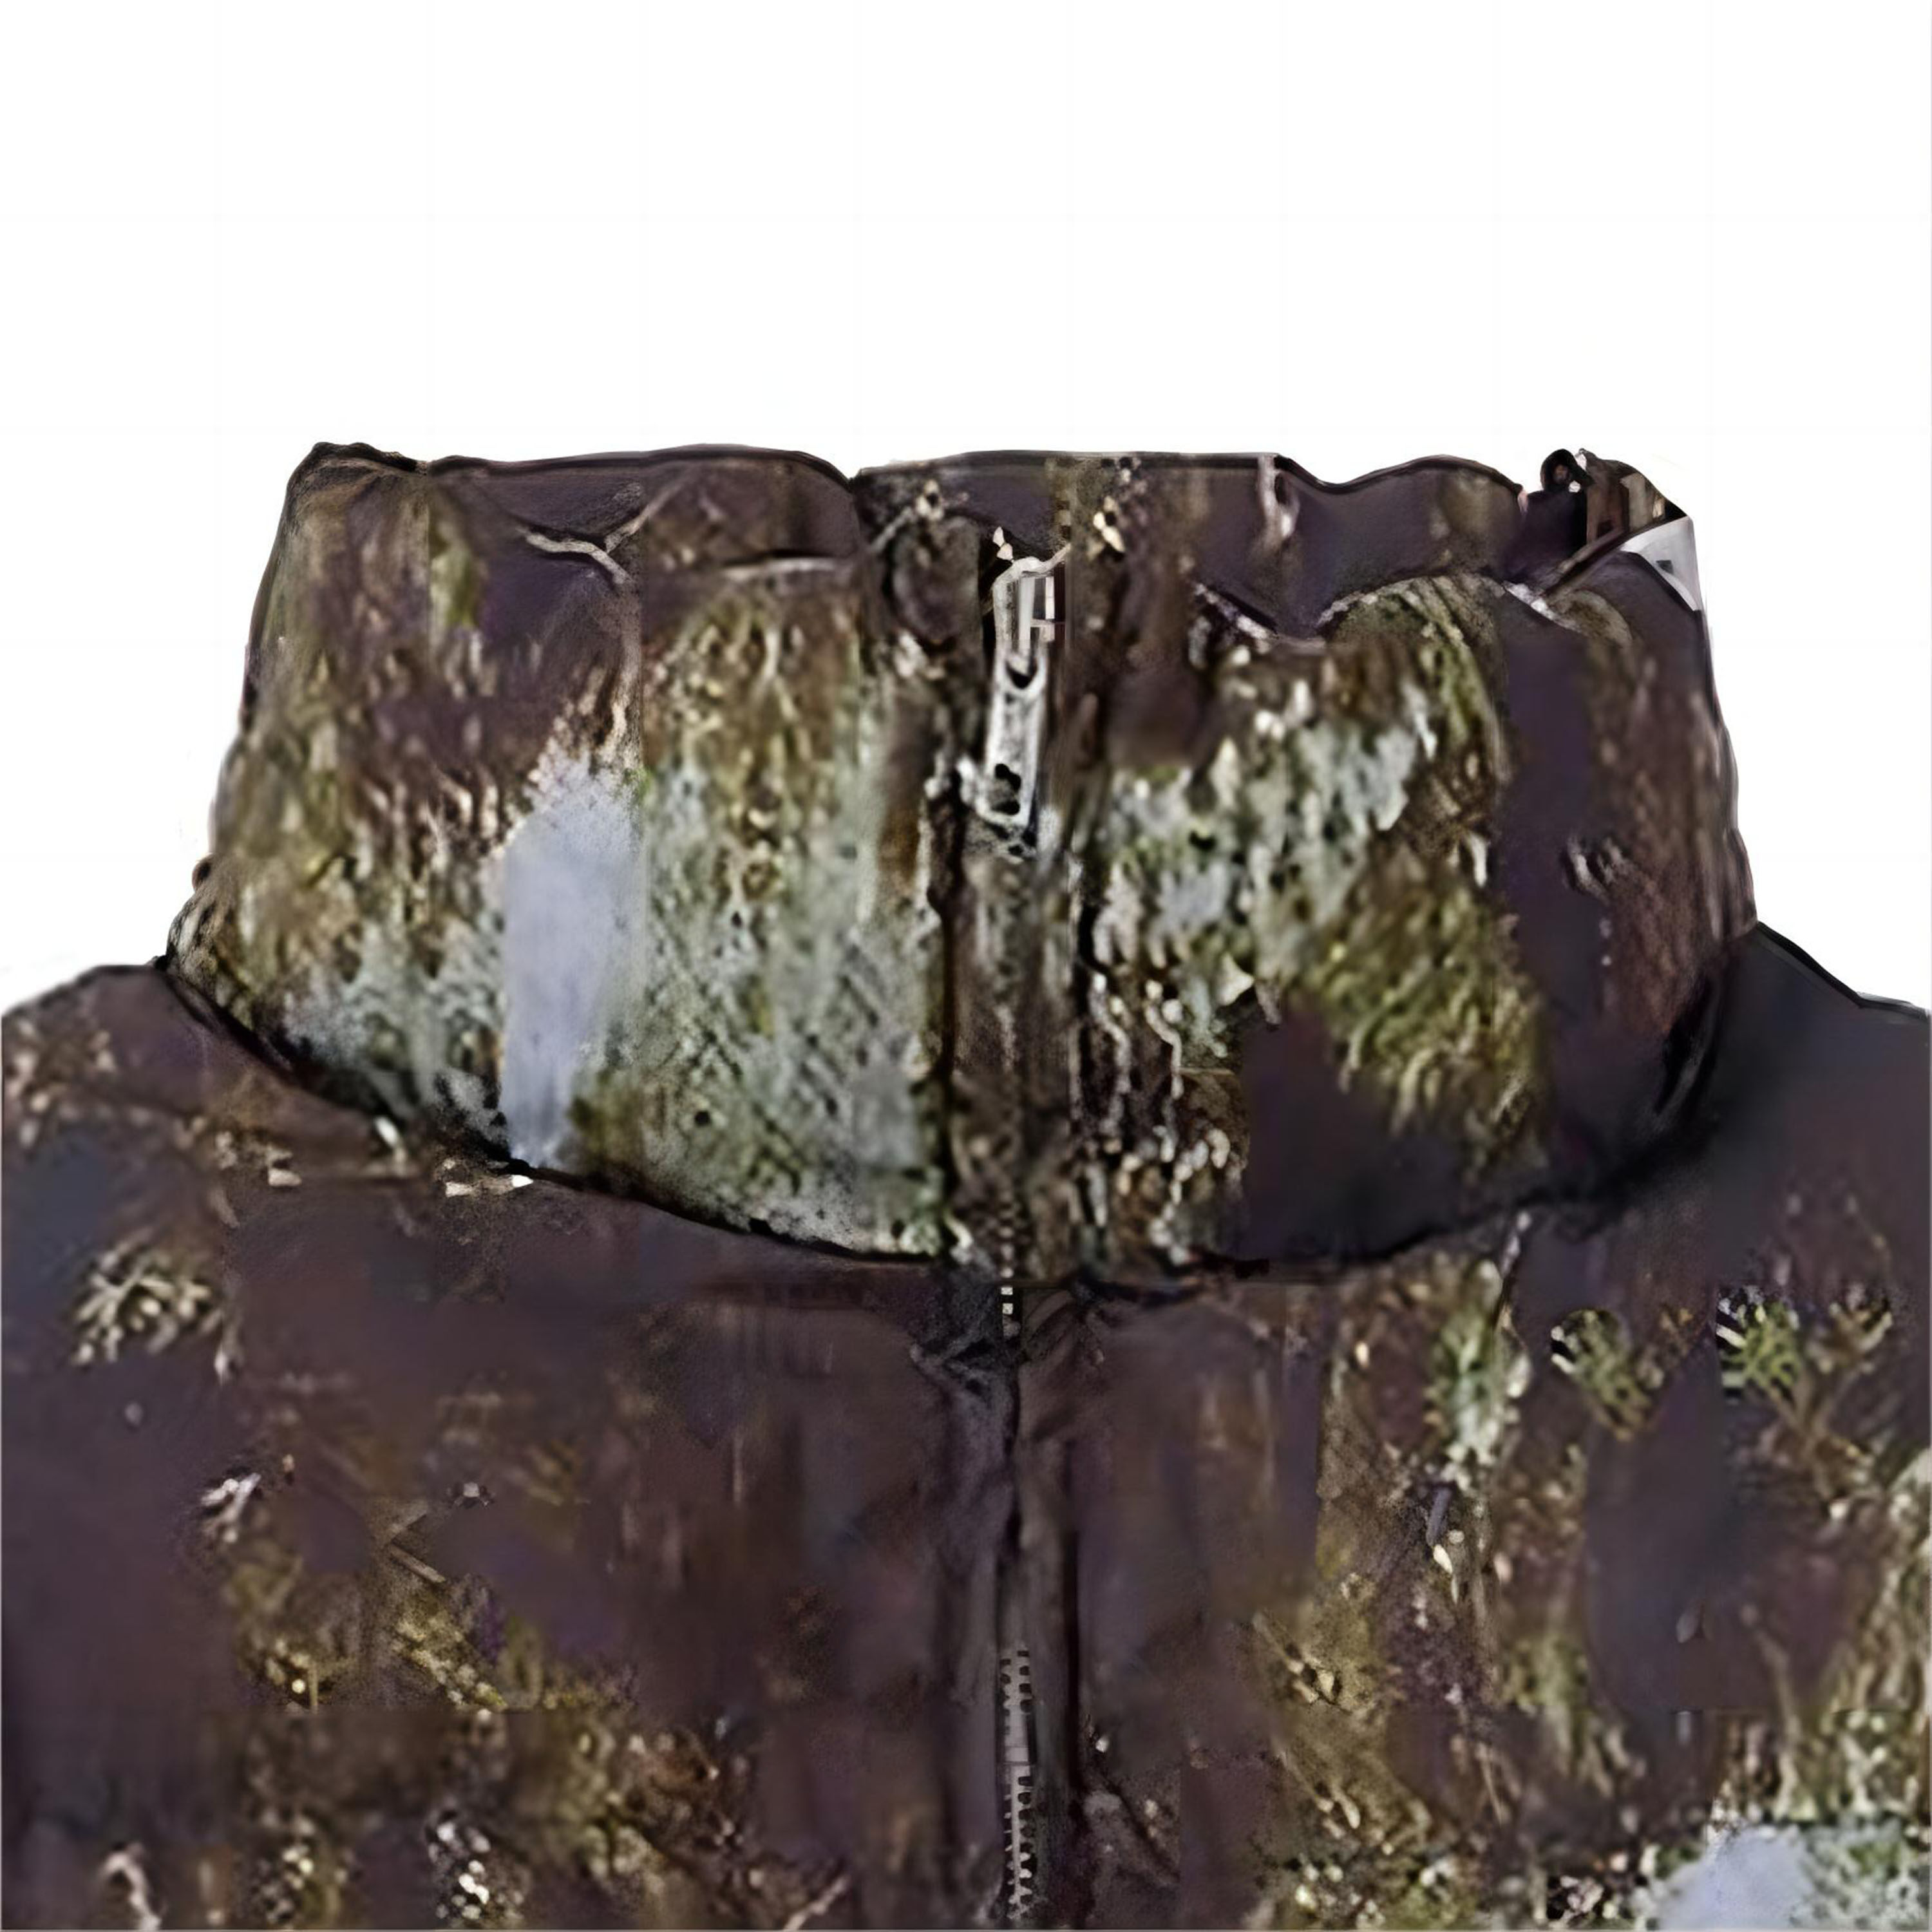 Jacket, Puffer Jacket, 80% Duck Down Filling, All-Over Distressed Letter Print, Zippered Stand Collar